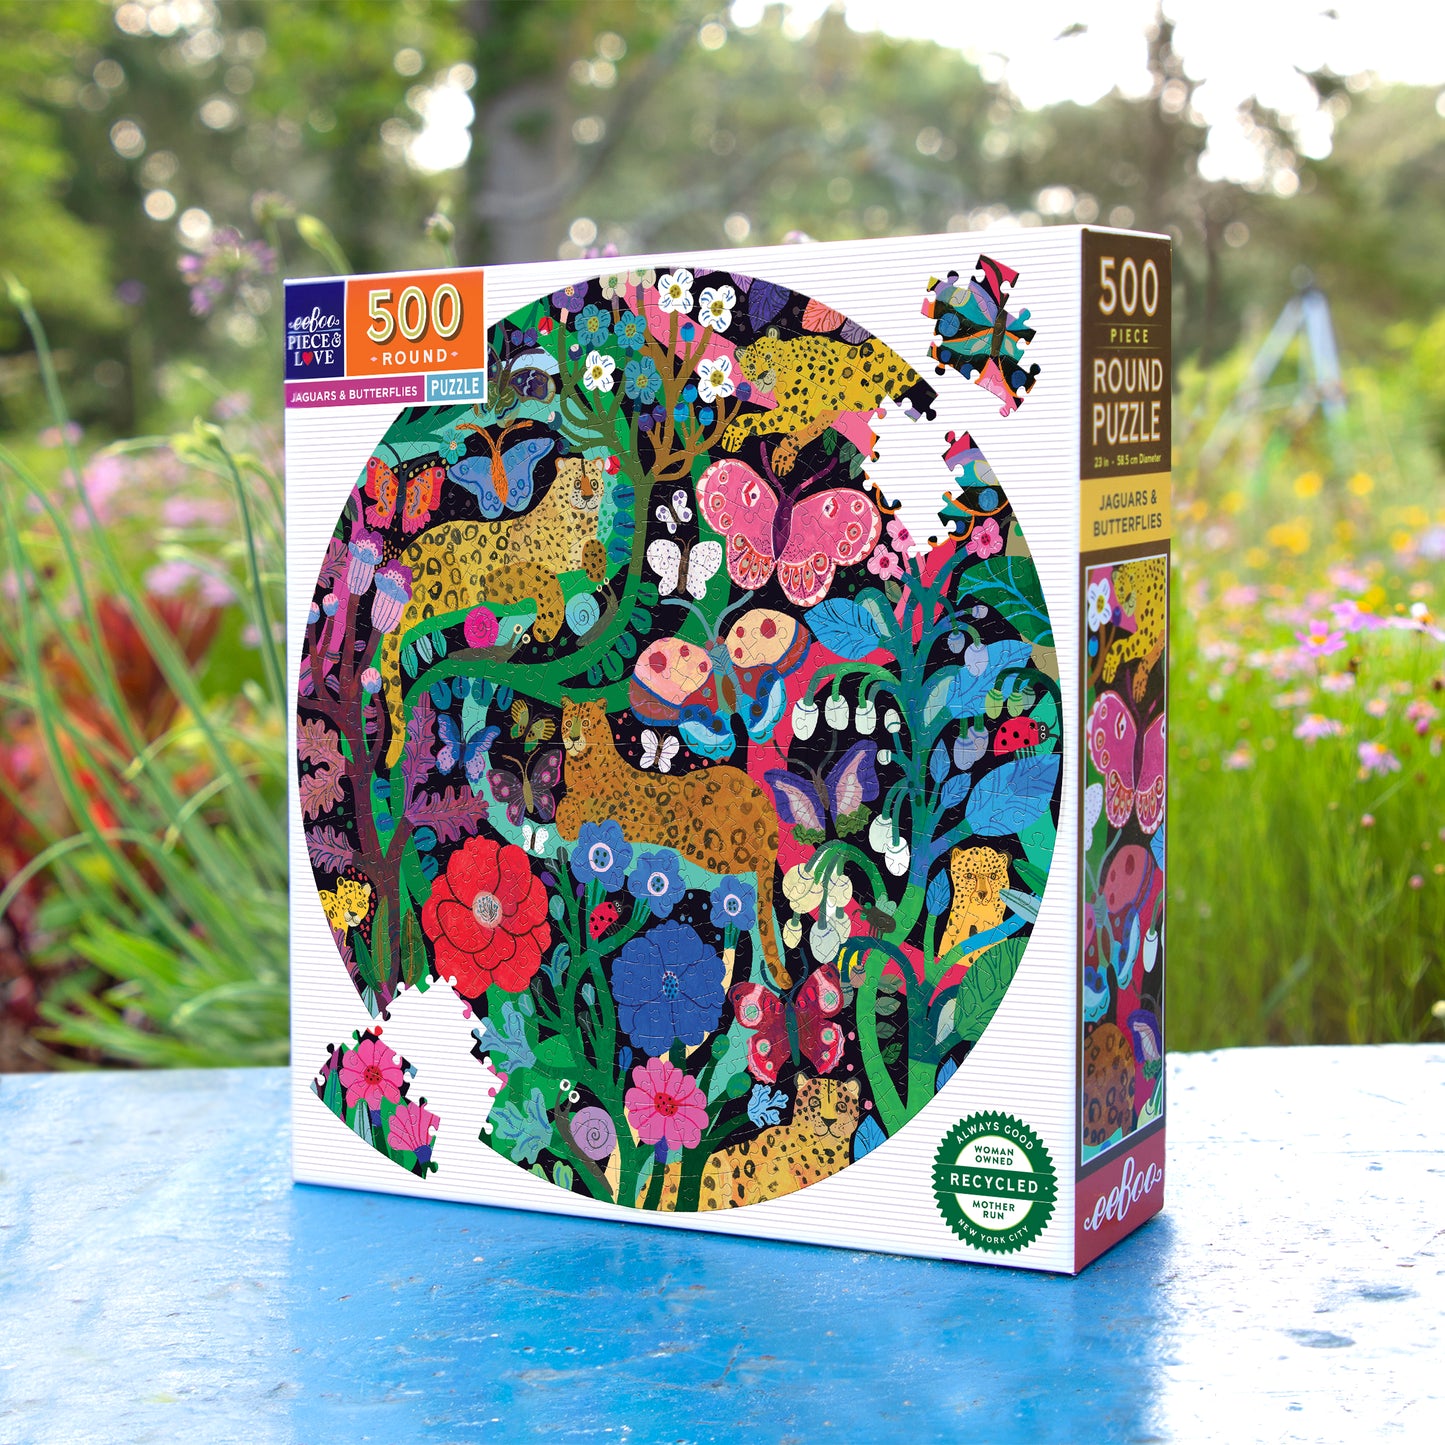 Jaguars and Butterflies 500 Piece Round Puzzle | Unique Fun Gifts